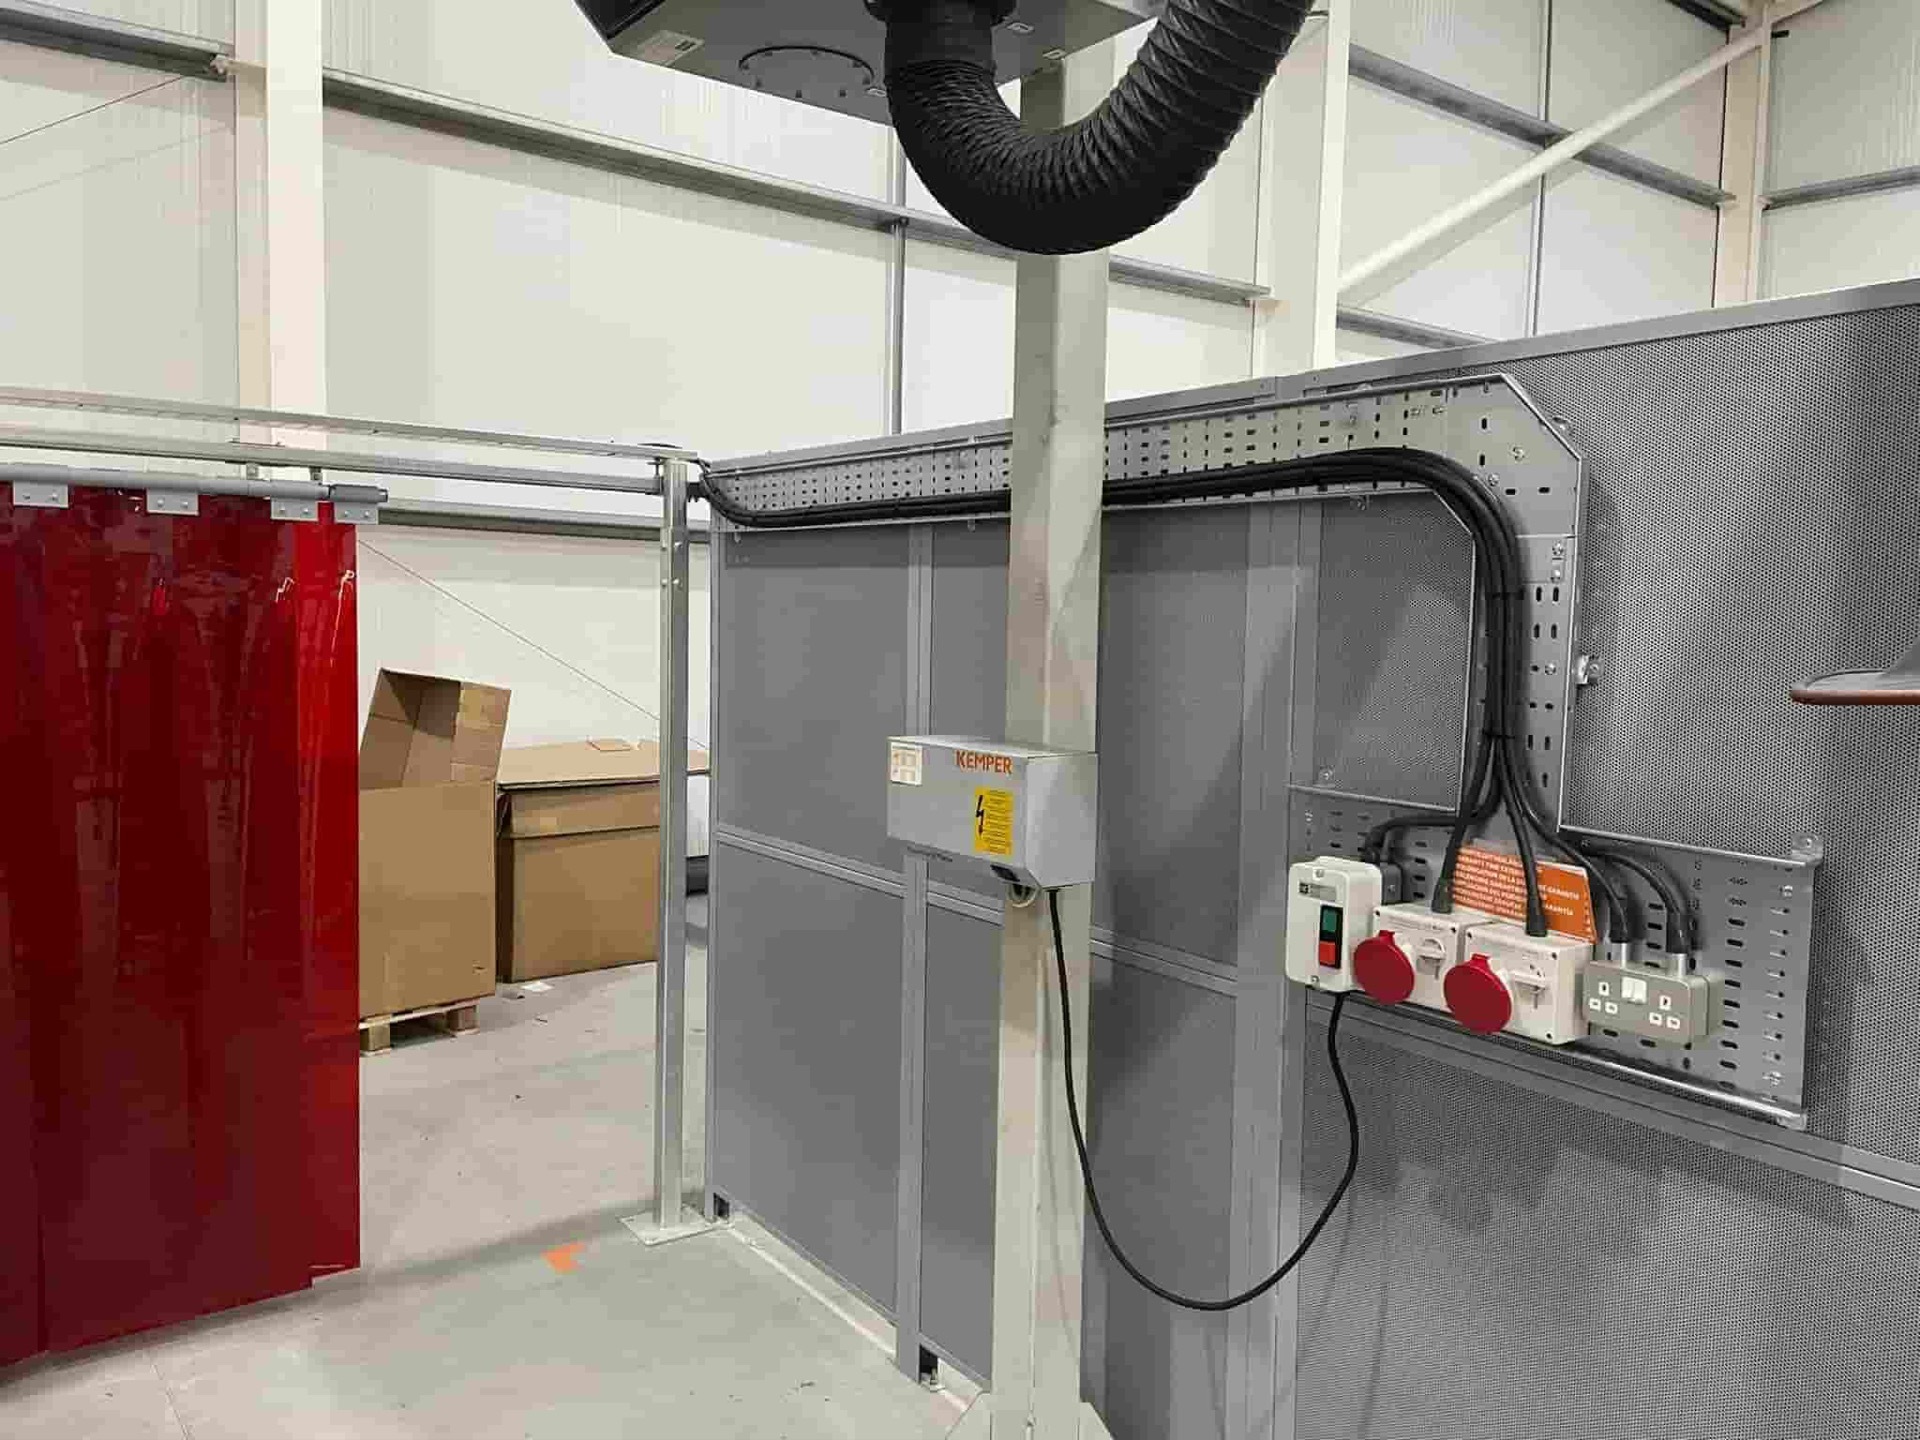 Emergency cut offs for power in indoor welding bays is a priority